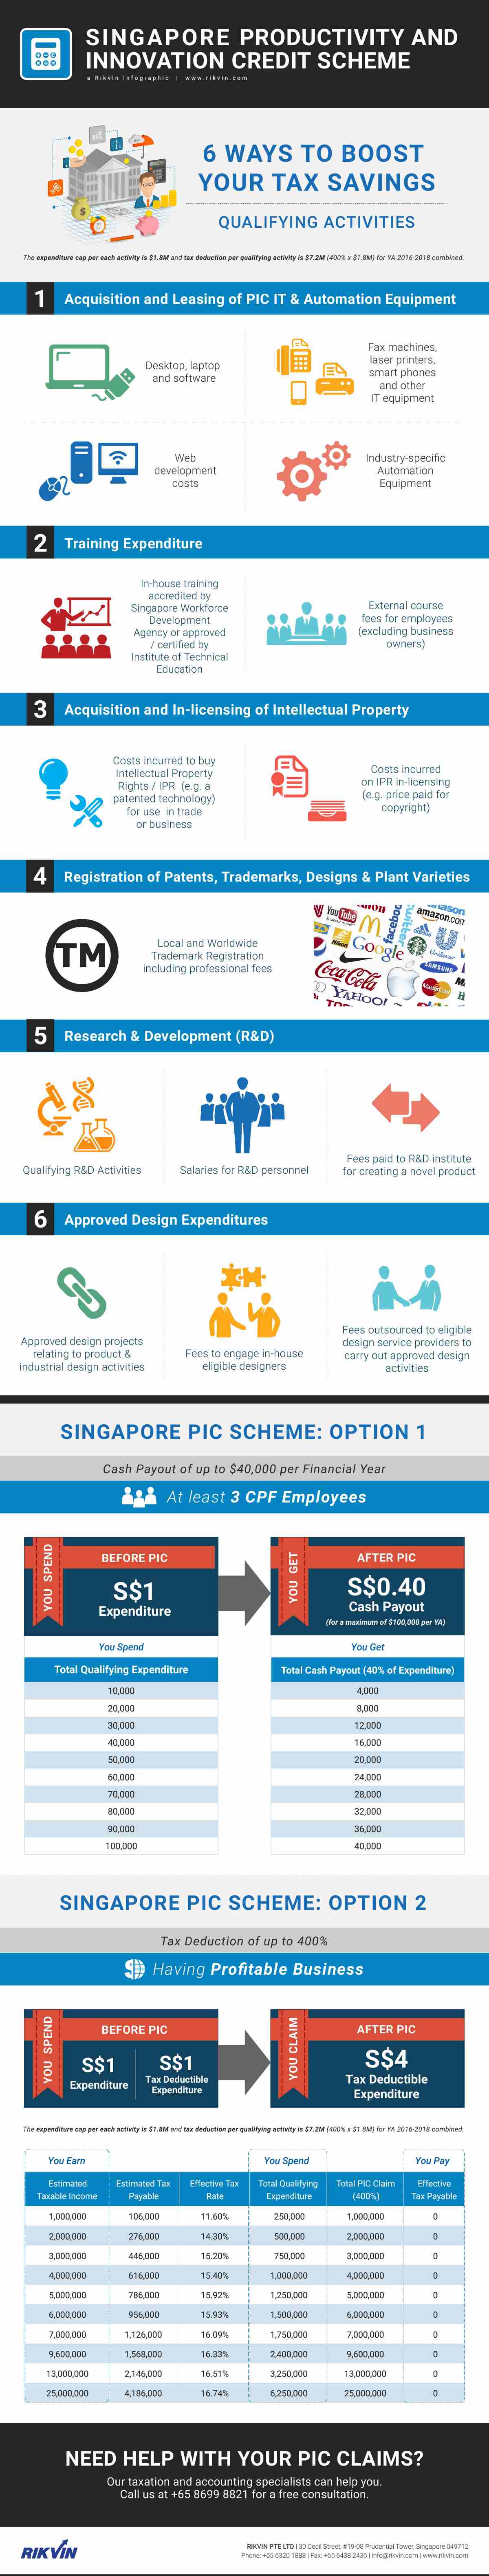 Singapore Productivity and Innovation Scheme Infographic